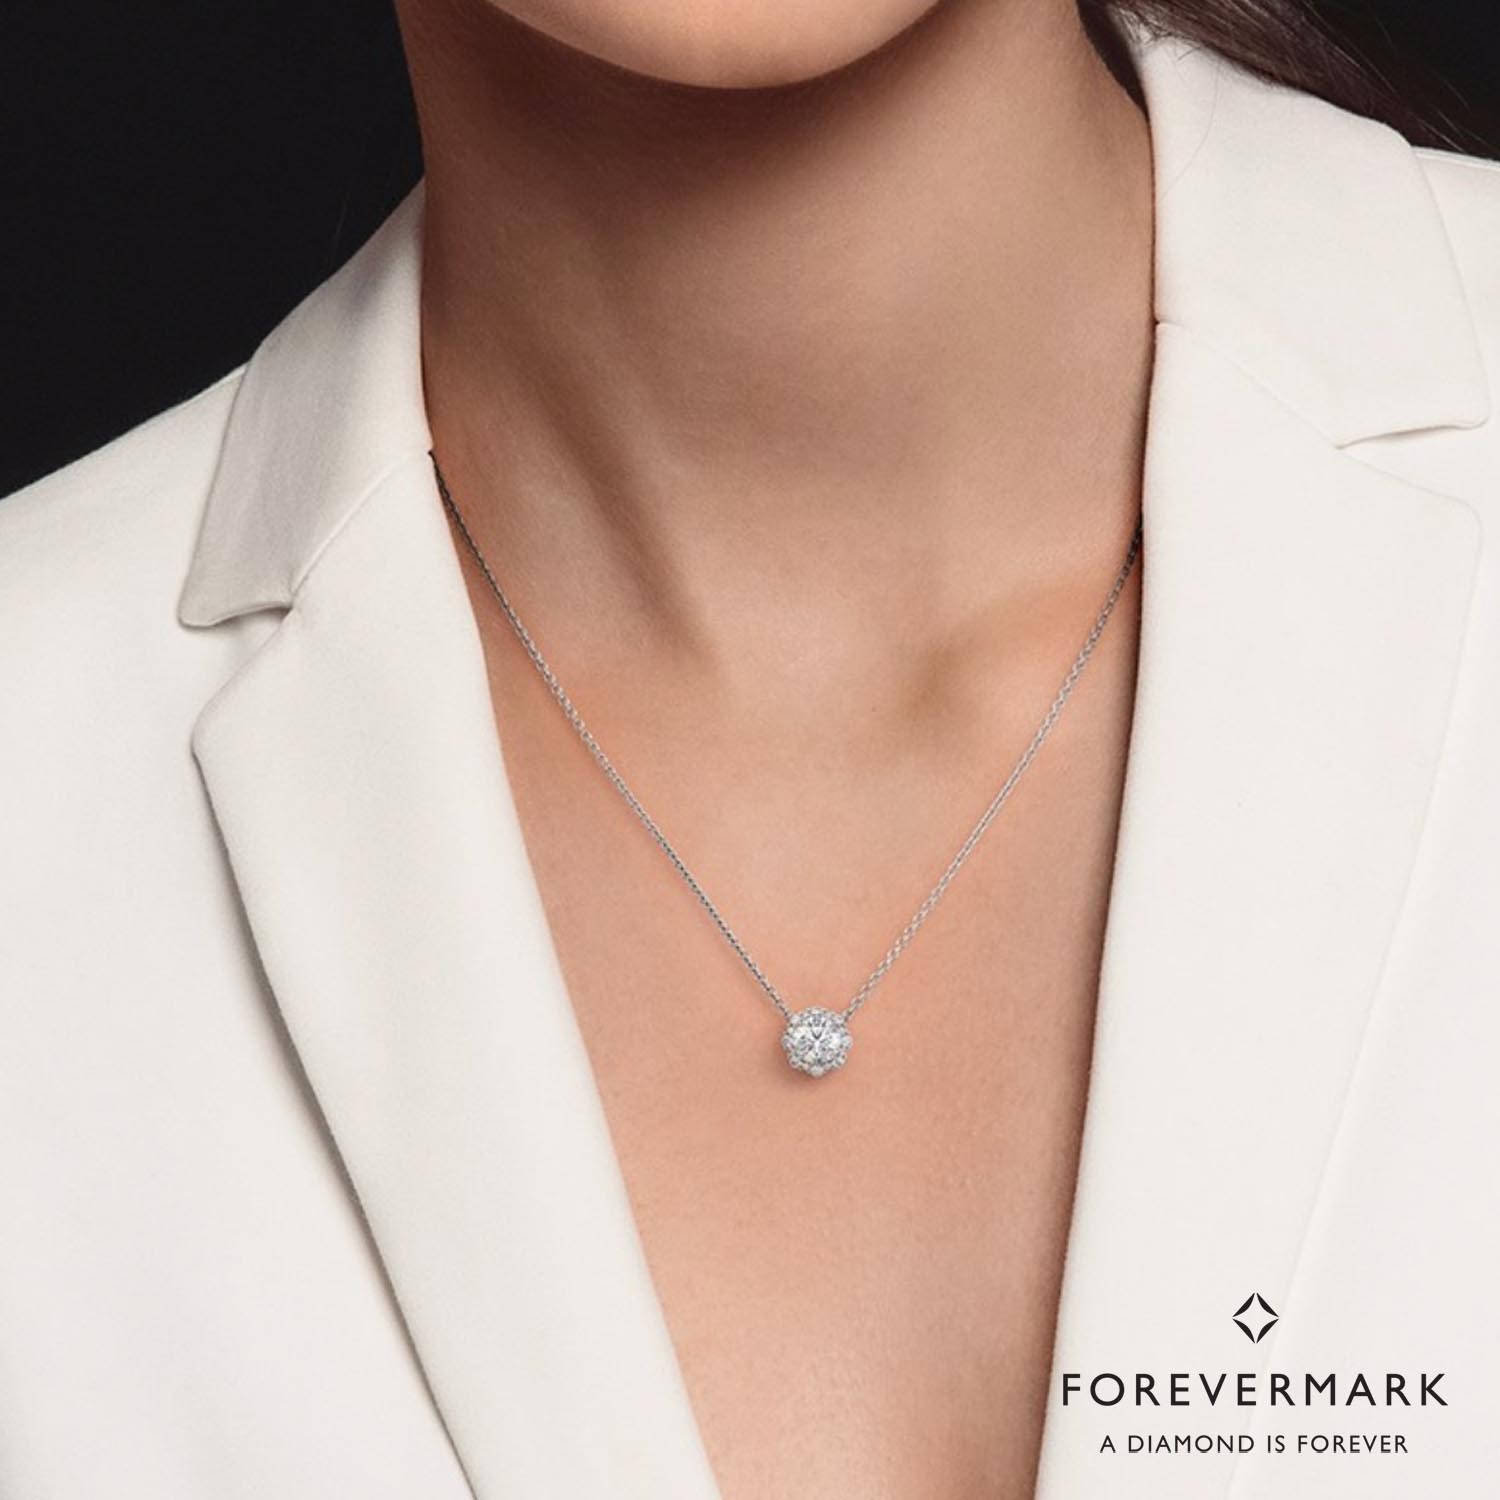 De Beers Forevermark Center of My Universe Floral Halo Diamond Necklace in Platinum (5/8ct tw)